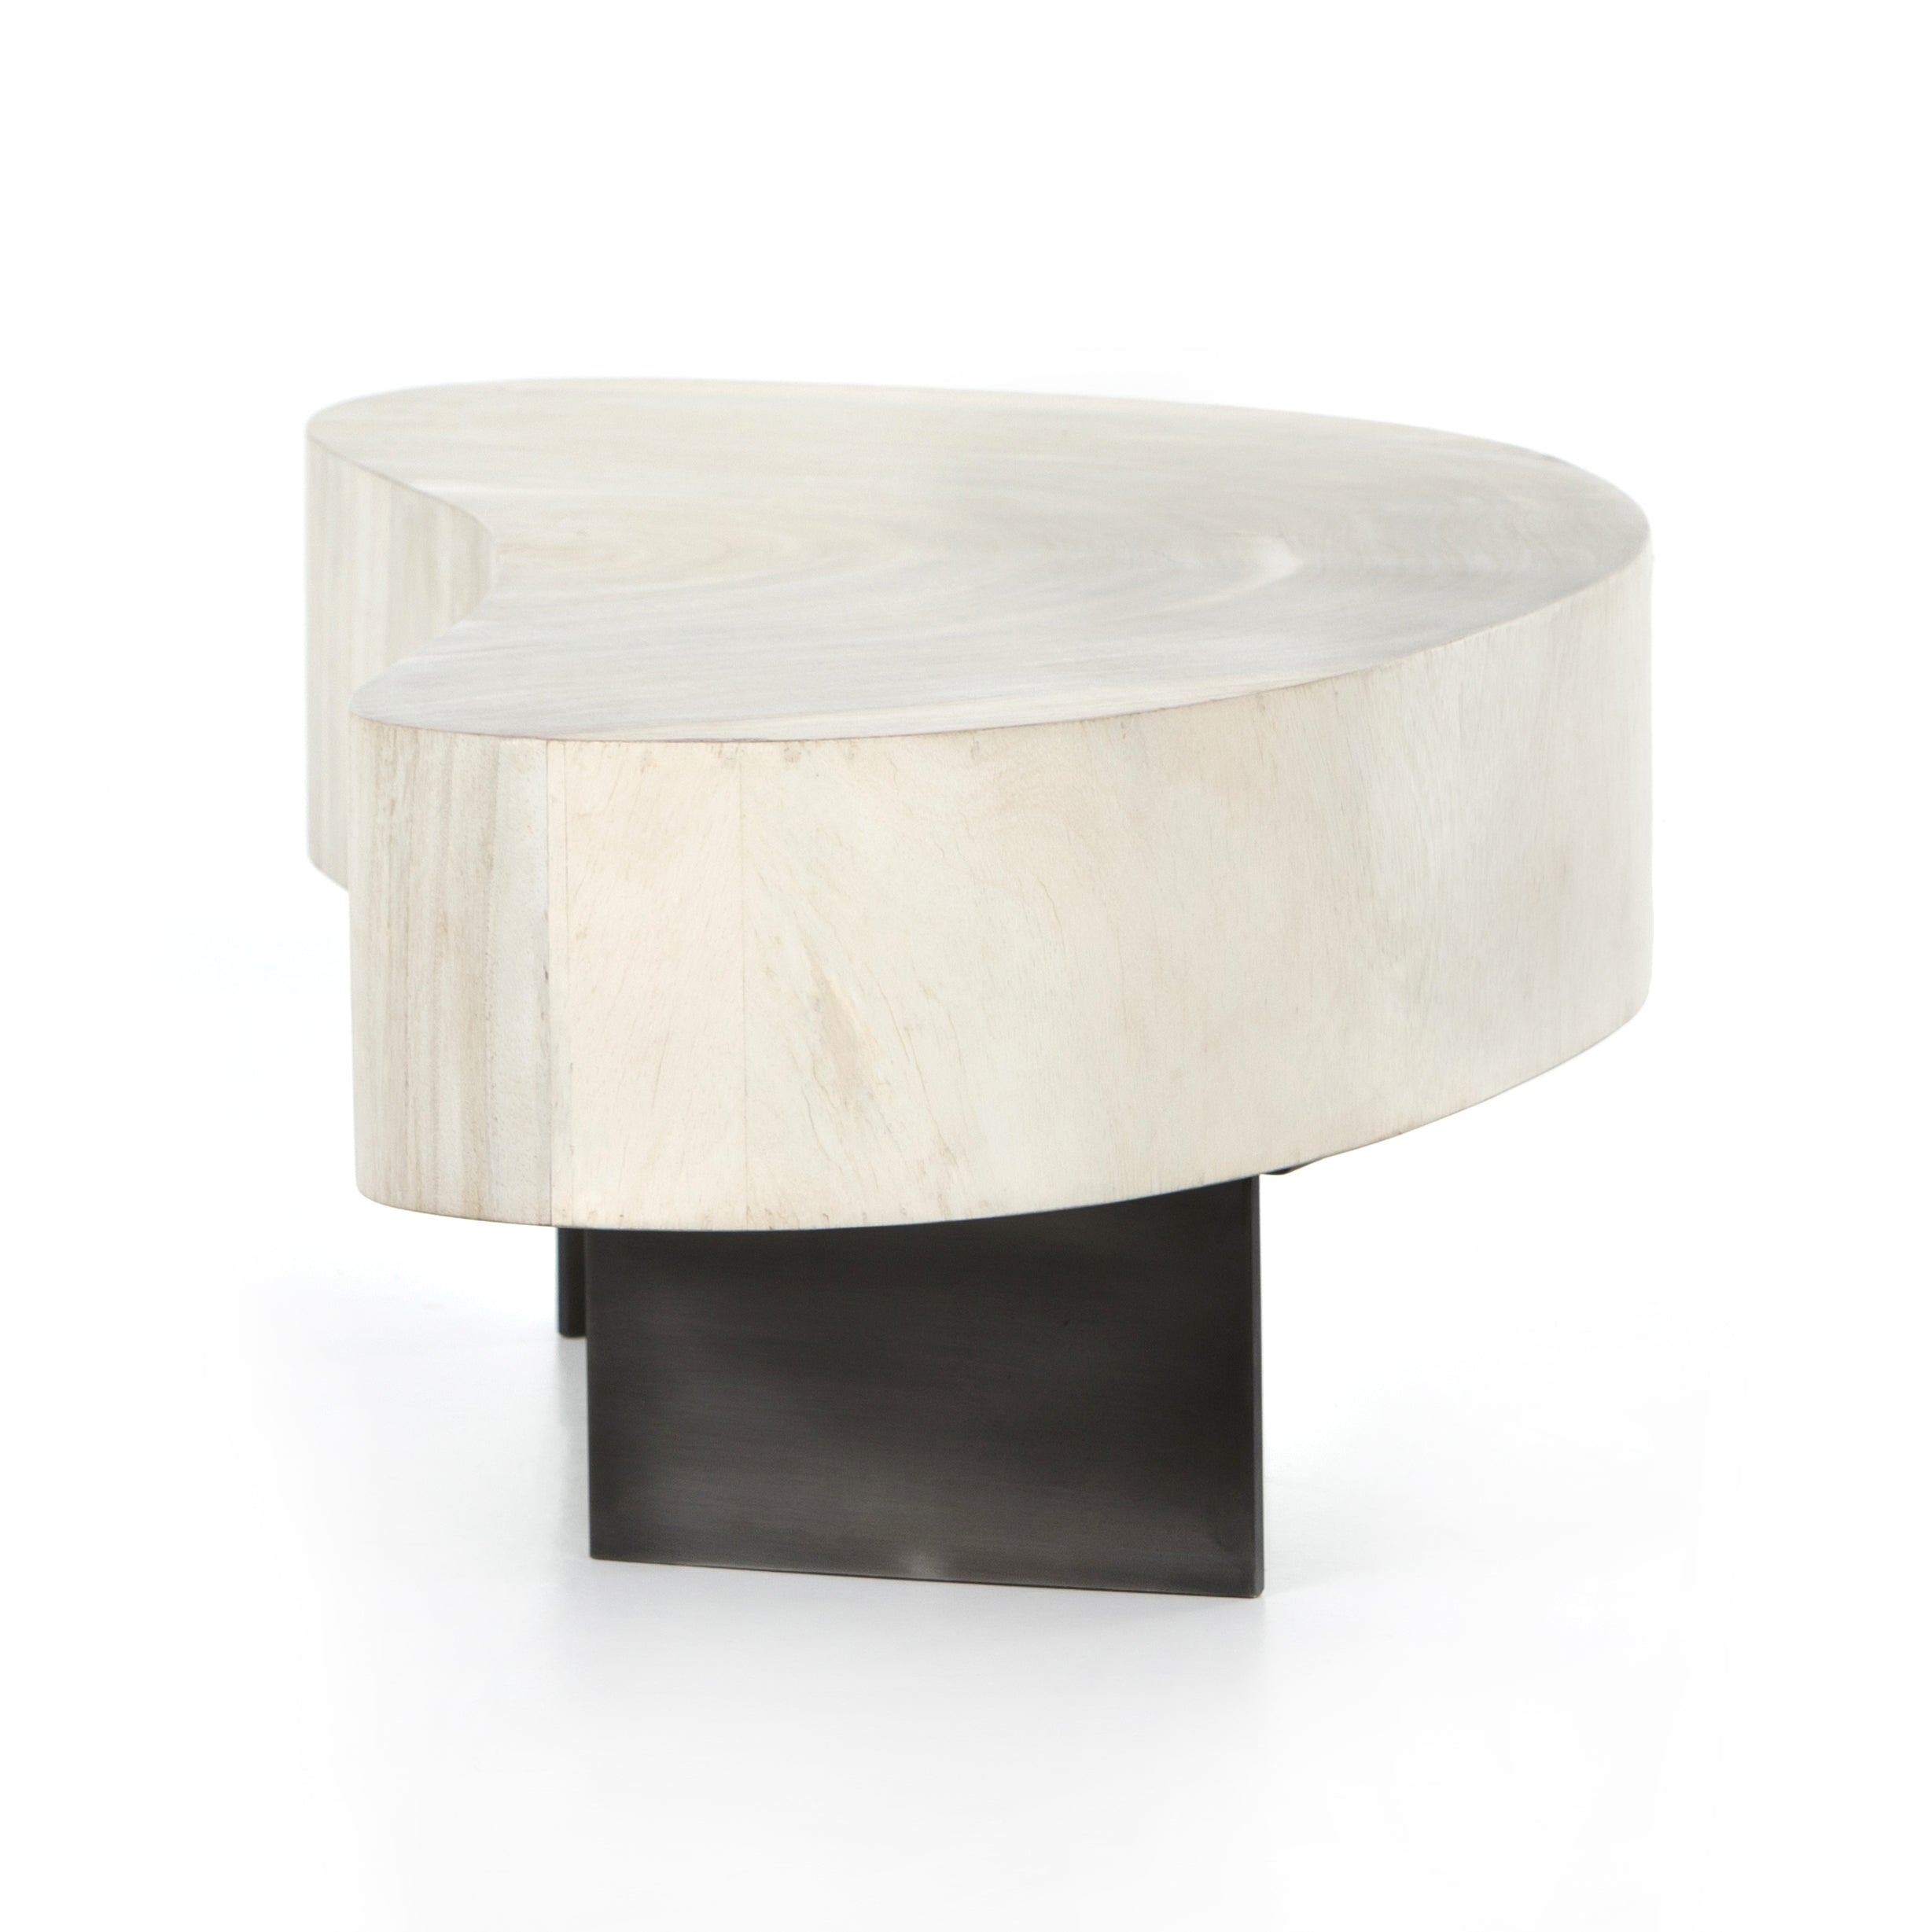 Natural beauty - total novelty. A thick slab of bleached, oyster-cut Guanacaste forms a tall, kidney-shaped coffee table. Visible rings speak to woods' natural graining, while a dark gunmetal-finished base provides clean contrast to the whole look. Amethyst Home provides interior design, new construction, custom furniture, and area rugs in the Boston metro area.